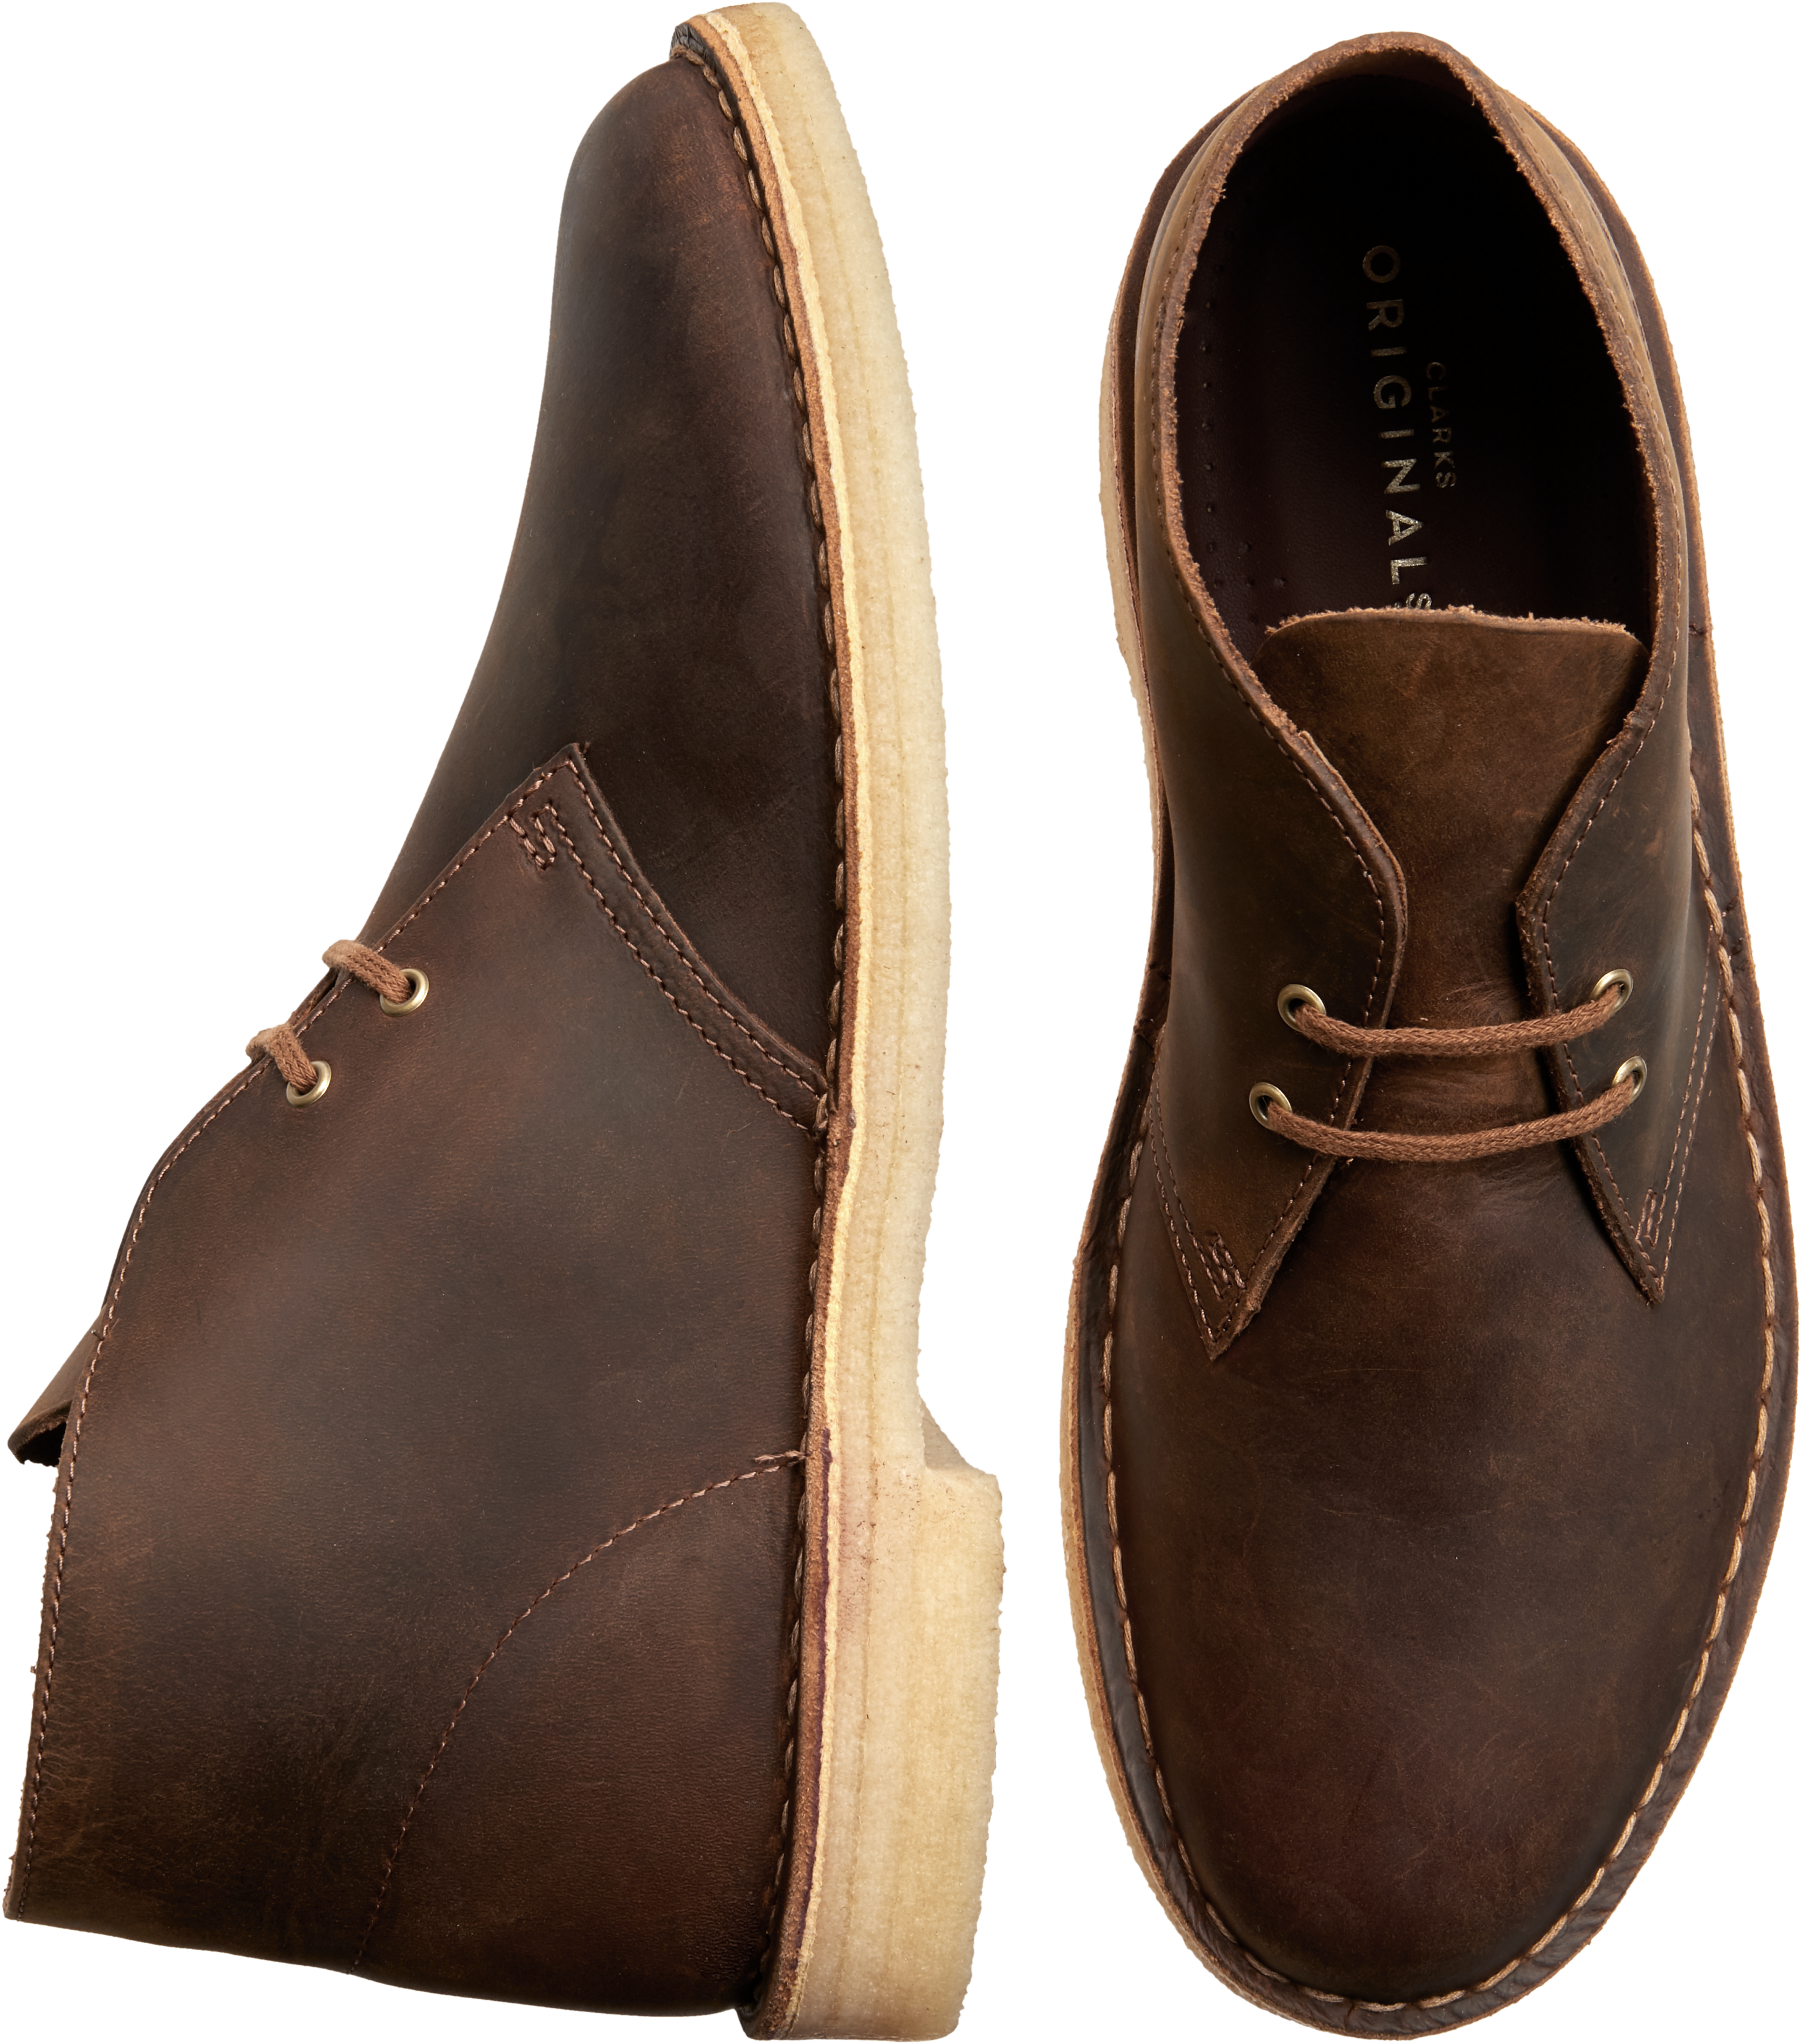 clarks shoes chile off 77% - online-sms.in